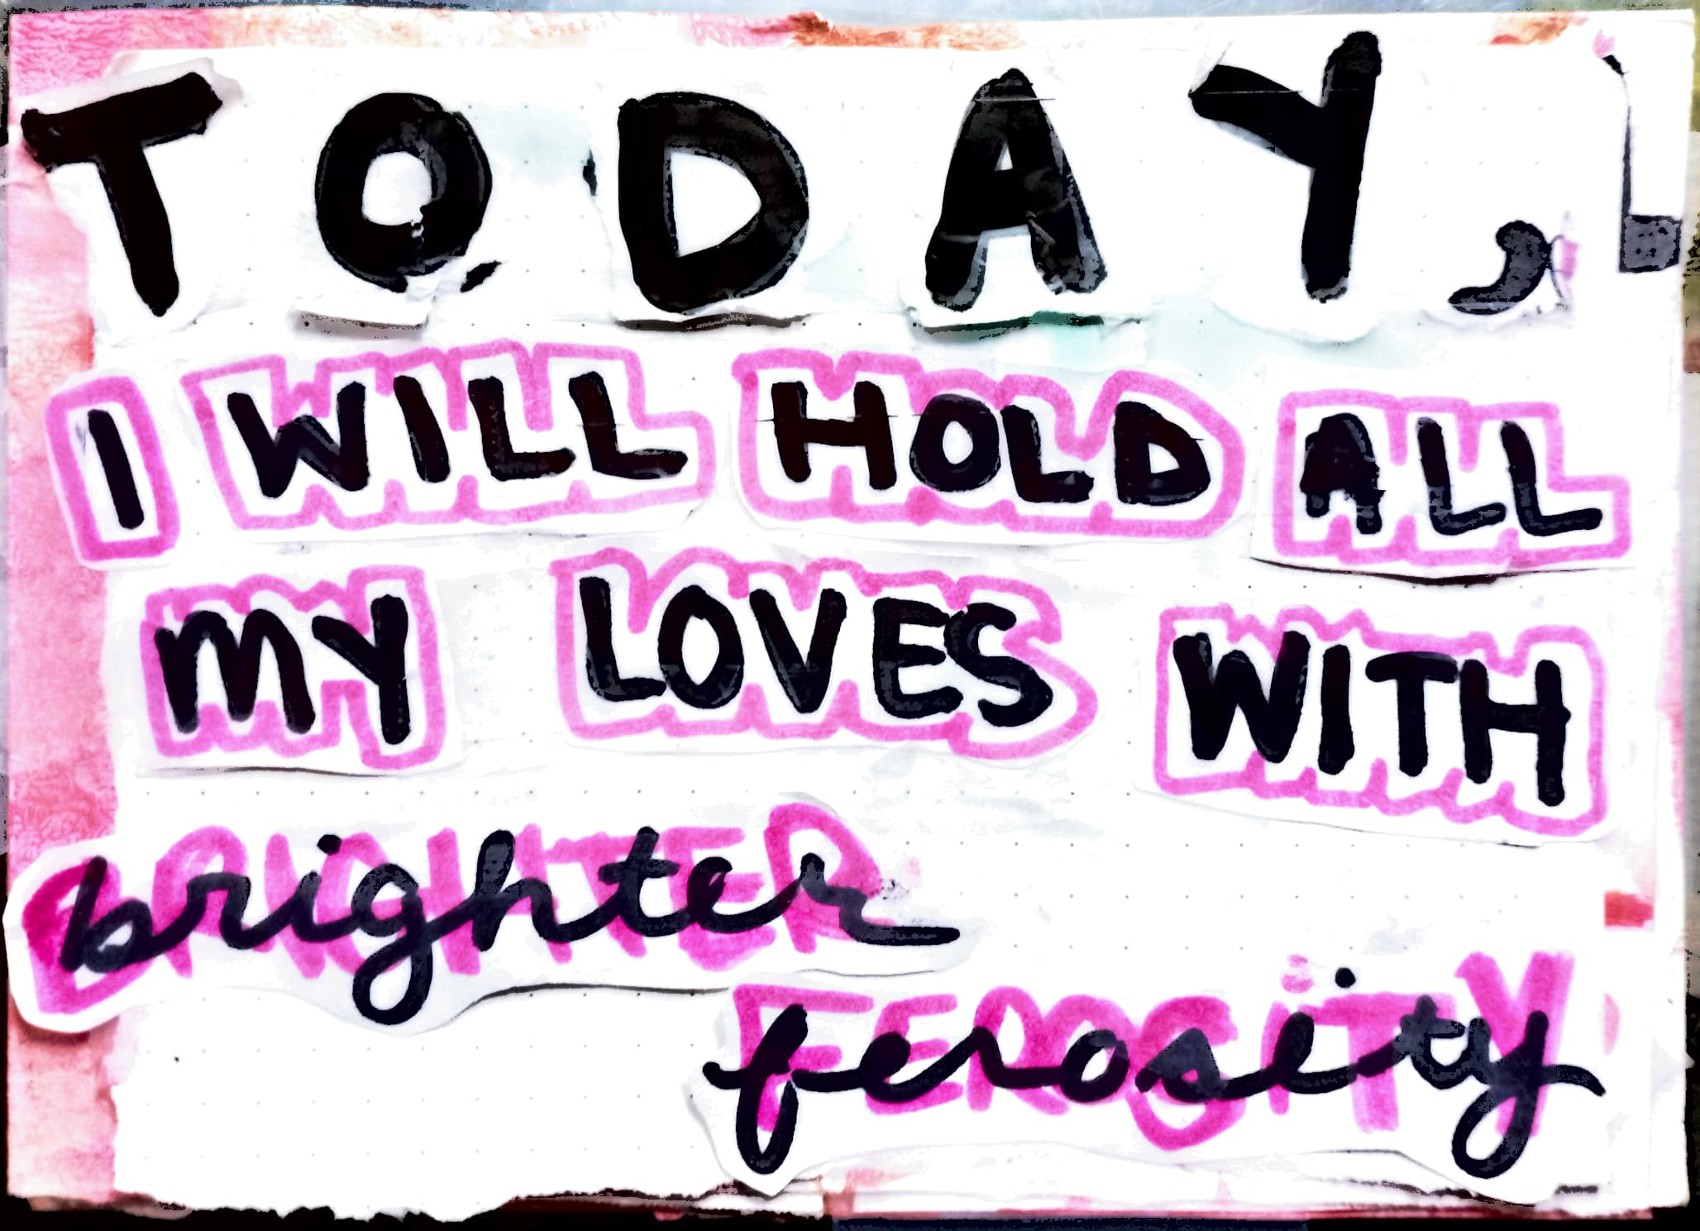 today, i will hold all my loves with brighter ferosity